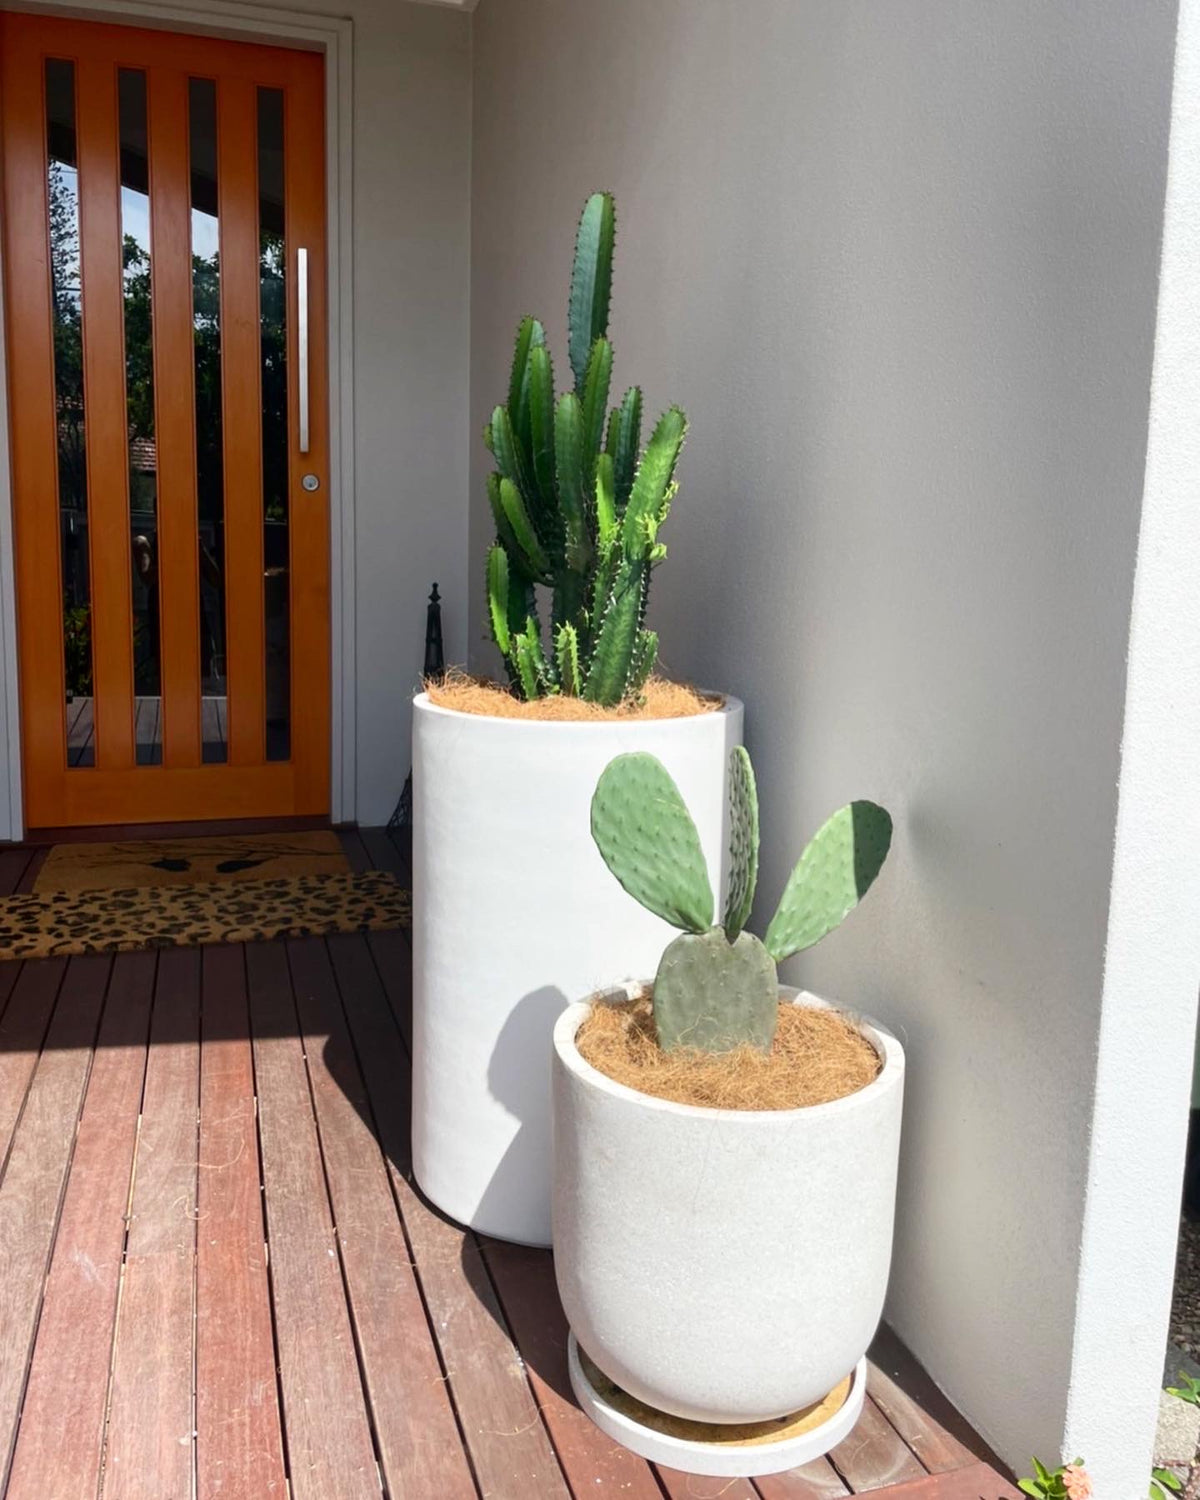 Cowboy Cactus 🌵 280mm&amp;400mm (Pickup/Delivery)